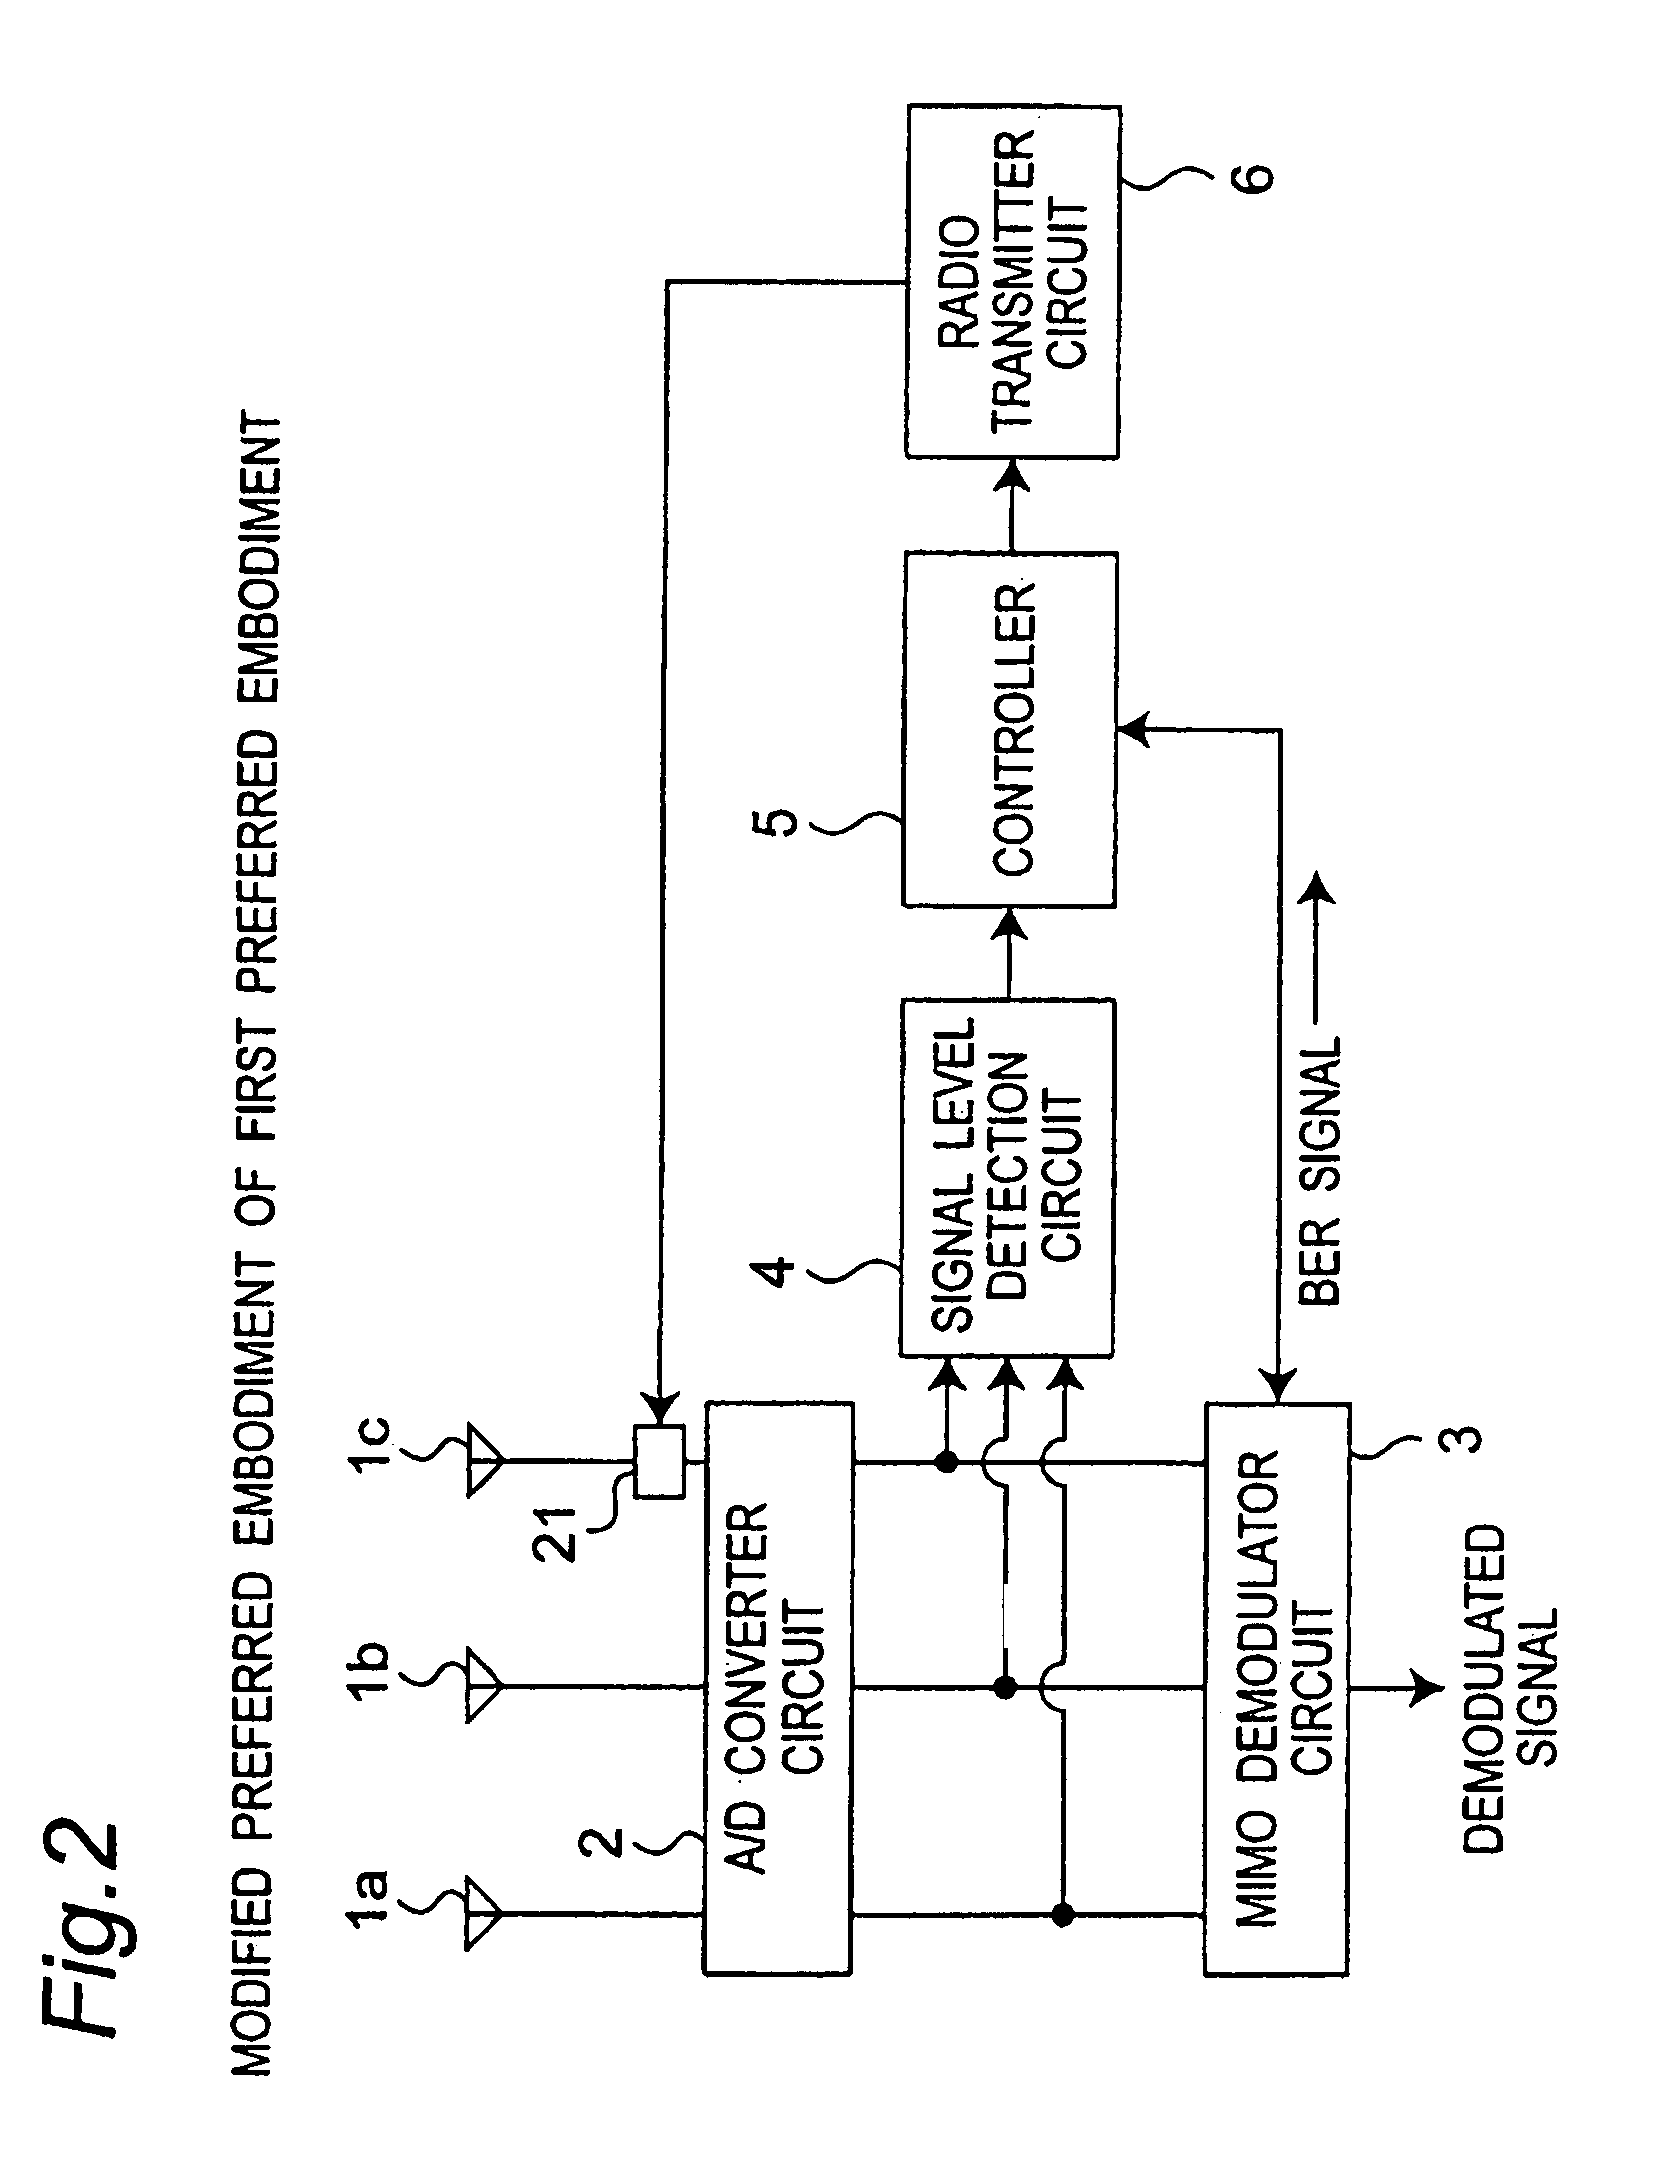 MIMO antenna apparatus controlling number of streams and modulation and demodulation method